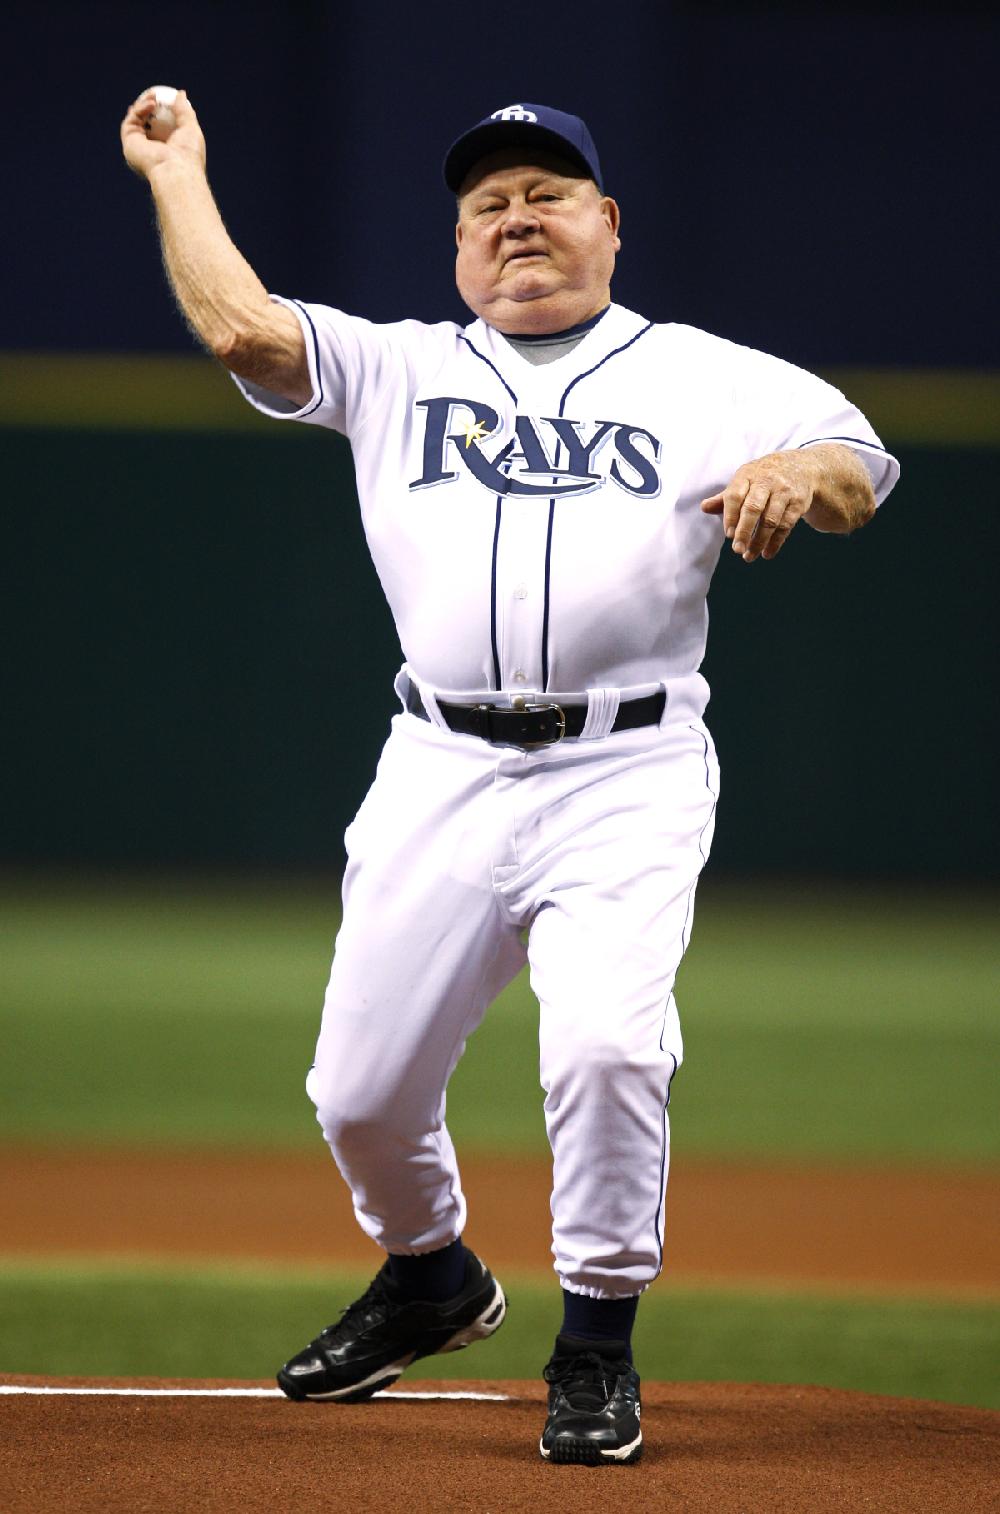 Rays' Don Zimmer on Friday's Zim Bear promotion 